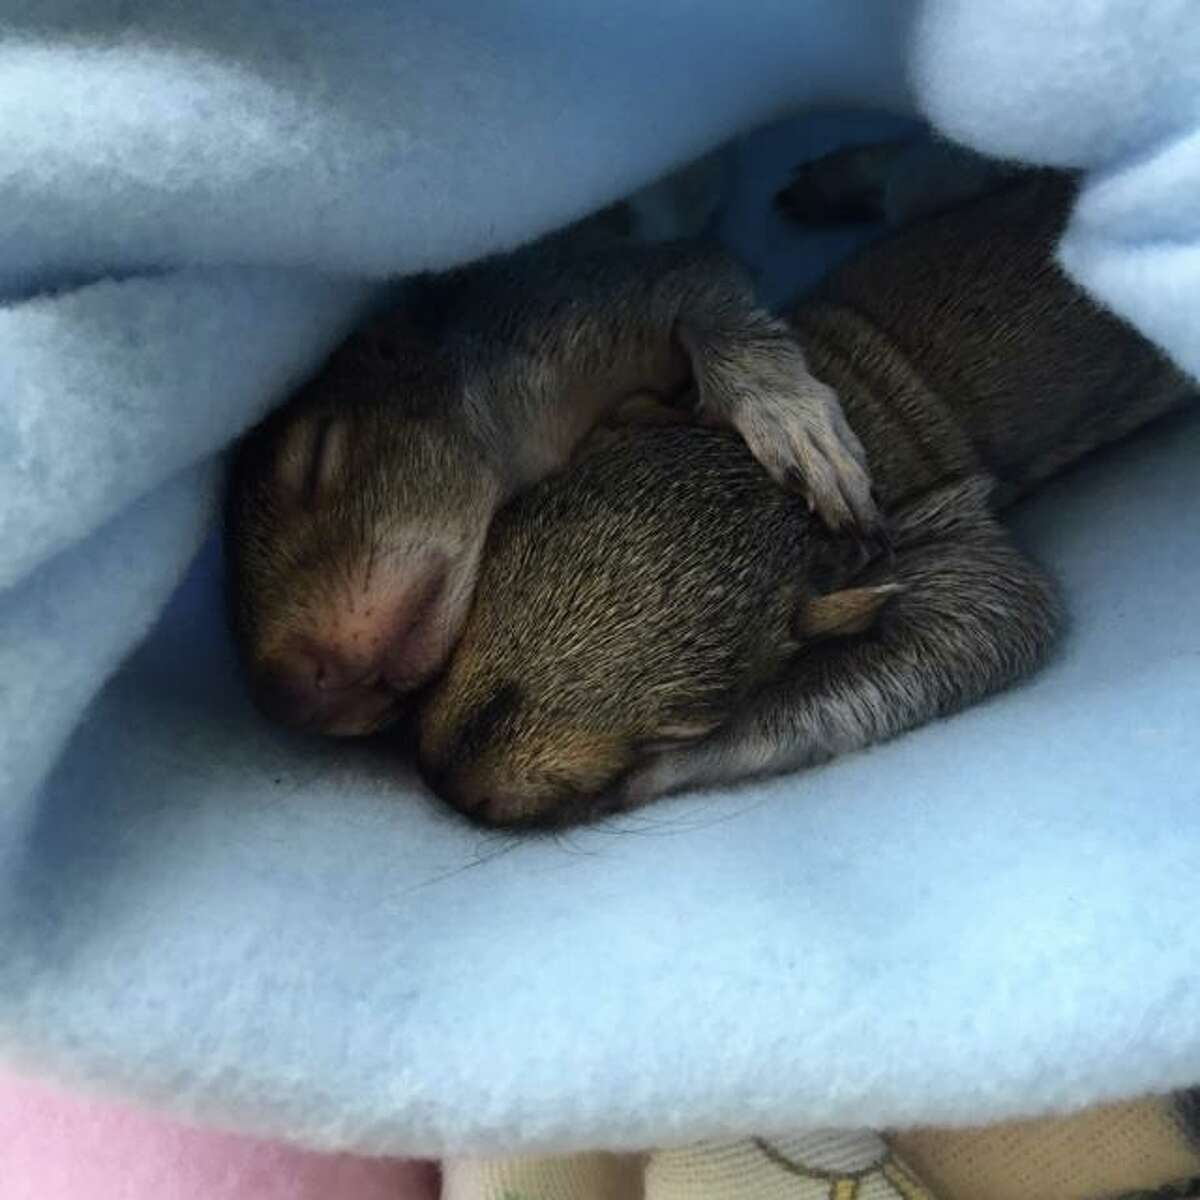 Two baby squirrels who were rescued over the weekend are doing very well and will be able to be released in approximately 12 weeks, according to Connecticut Wildlife Rehabilitator Allison Matula.